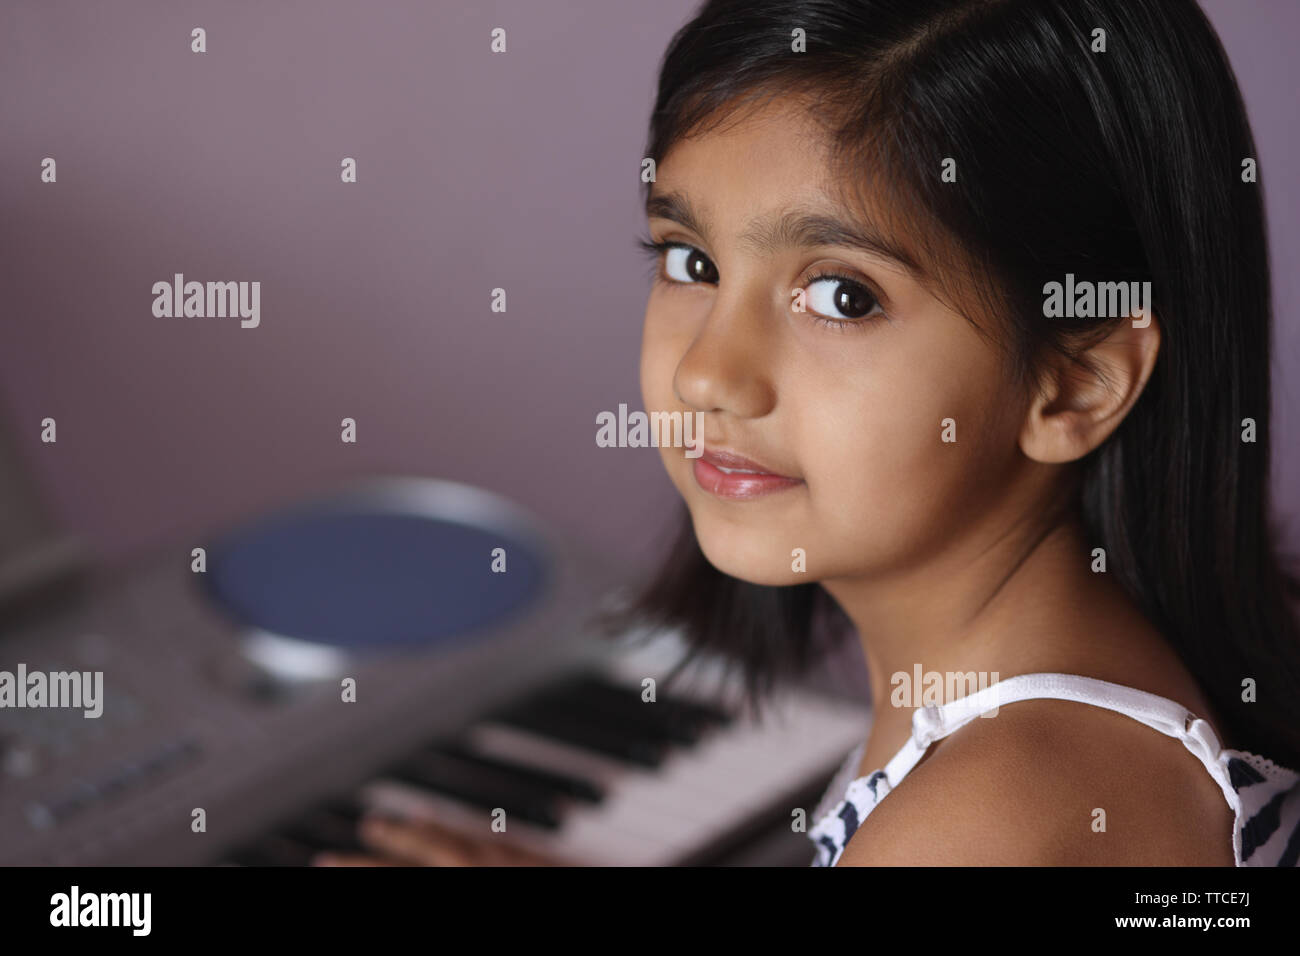 Girl playing a synthesizer Stock Photo